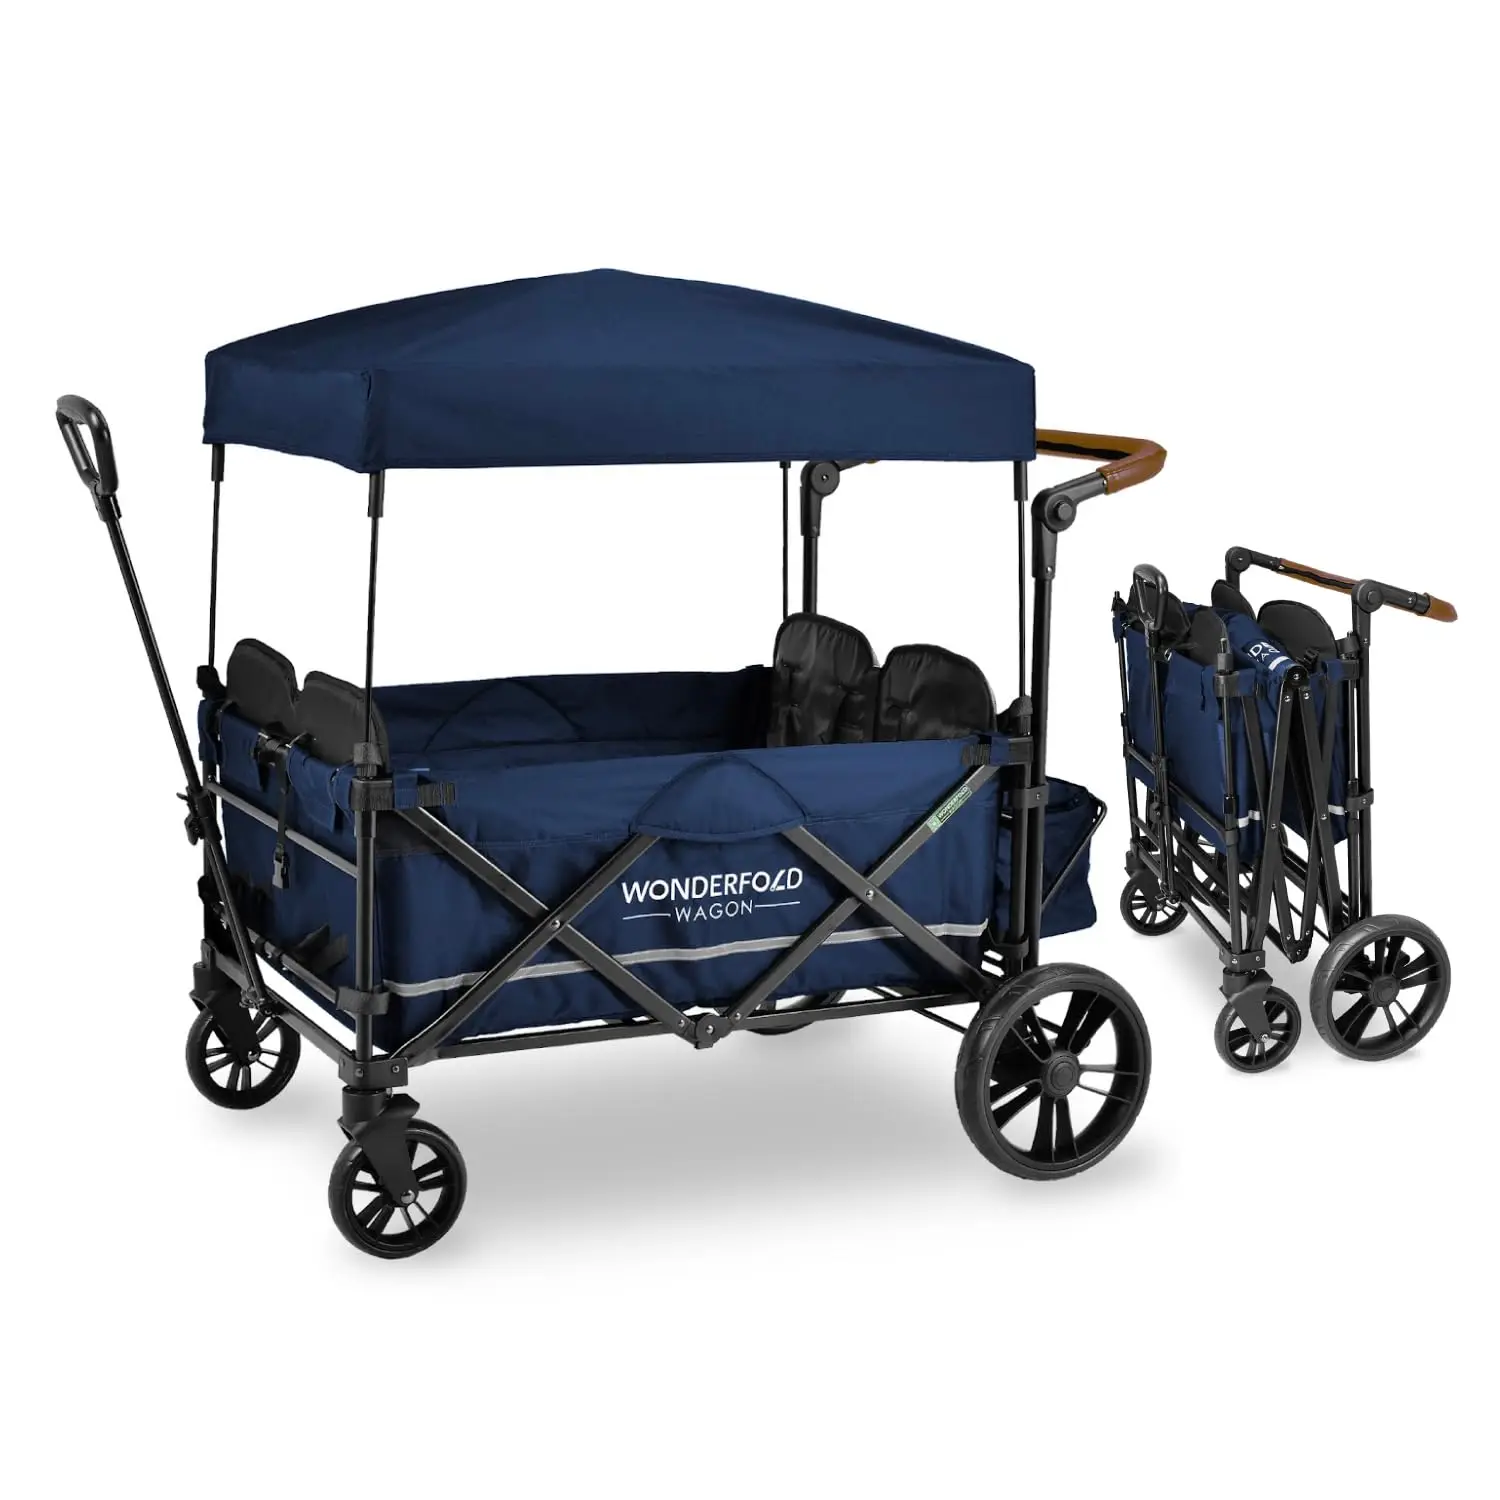 

WONDERFOLD X4 Push & Pull Quad Stroller Wagon (4 Seater) Featuring Seats with 5-Point Harnesses, Adjustable Push Handle